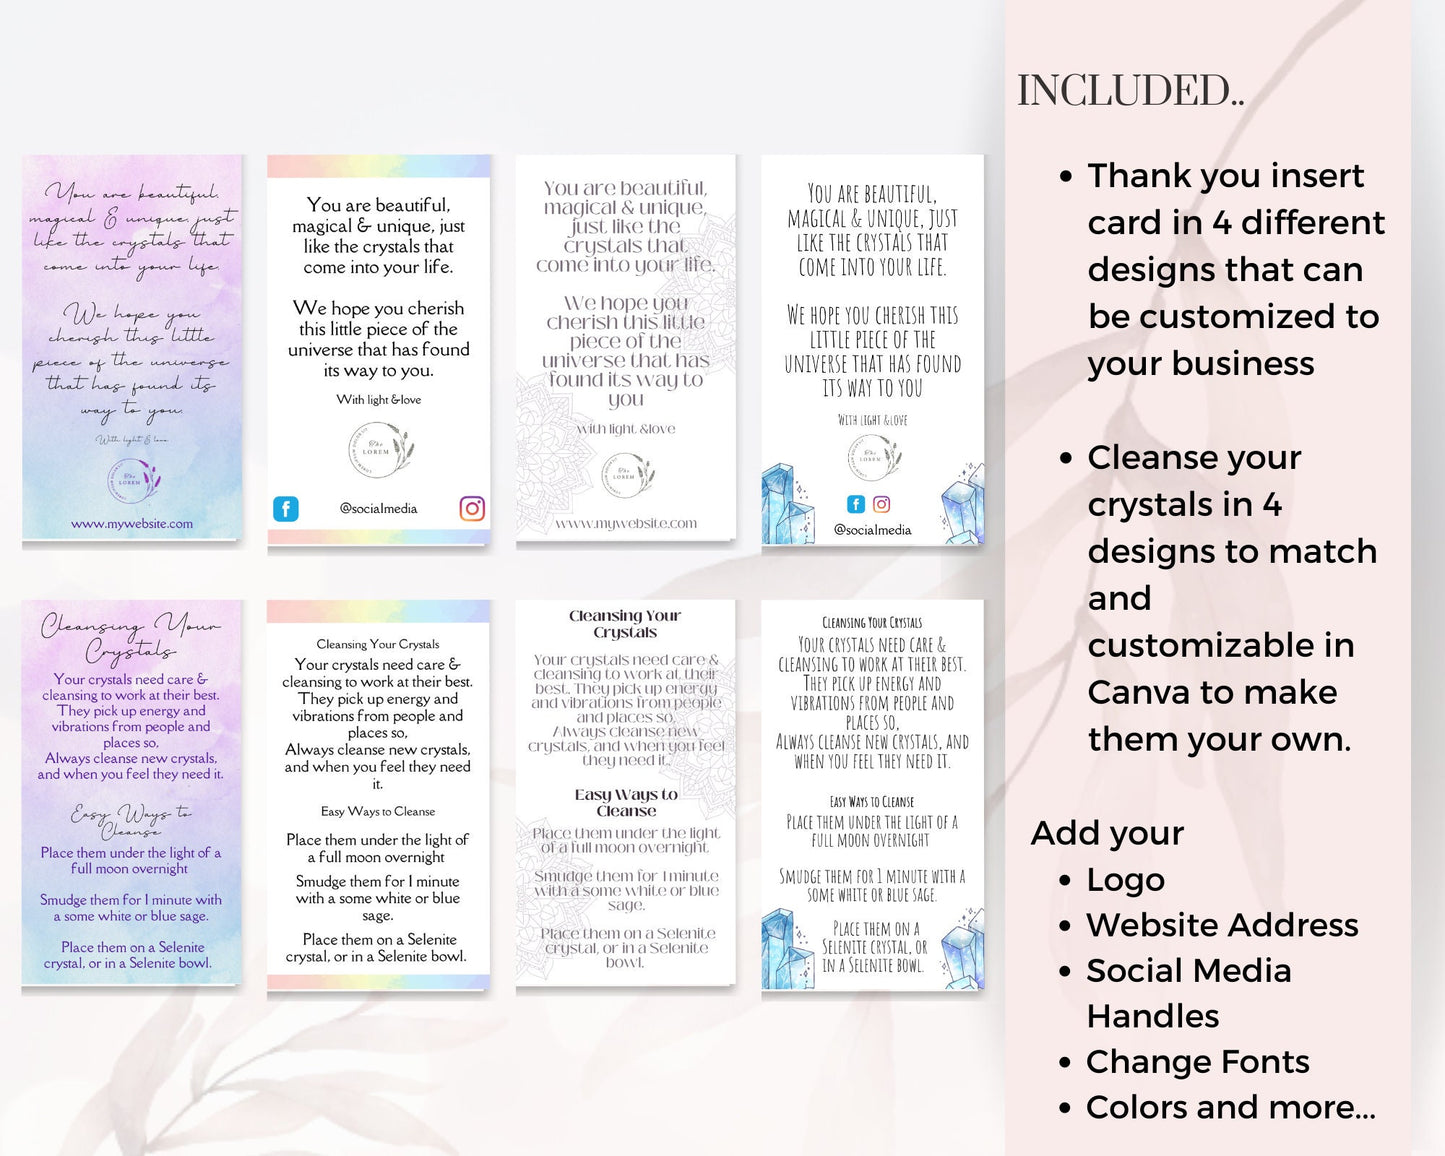 Crystal Insert Cards & Crystal Cleansing Cards Set, Crystals gift insert card, crystal information and crystal thank you insert